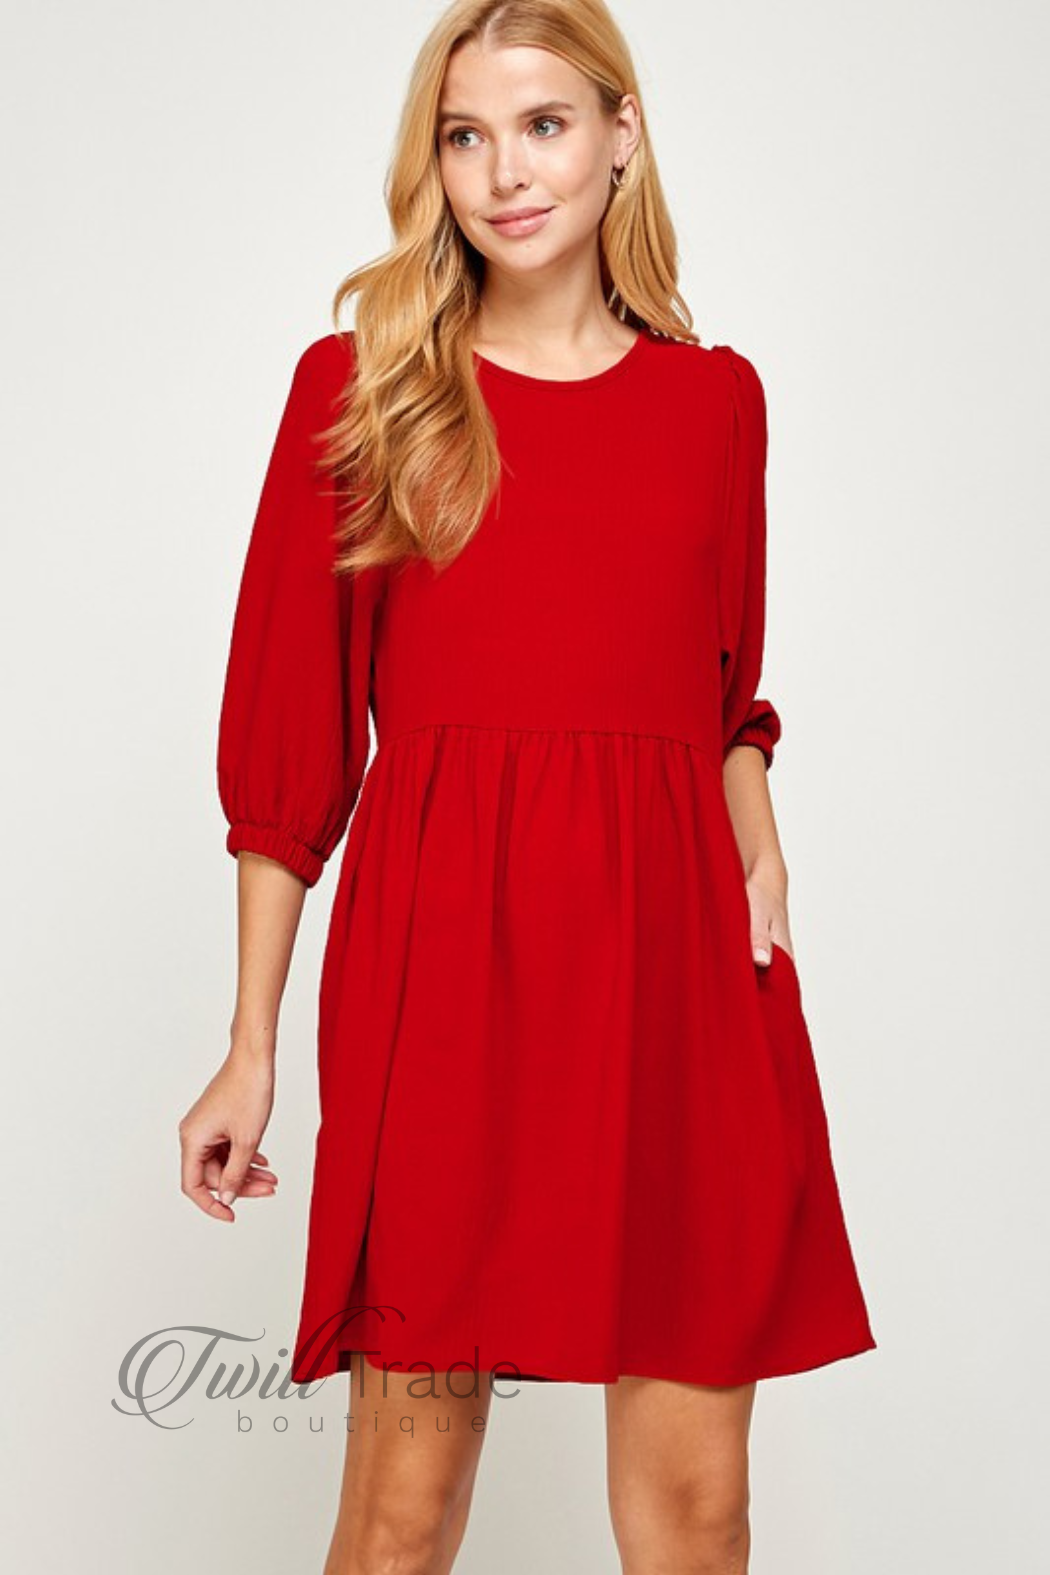 Red Baby Doll Dress